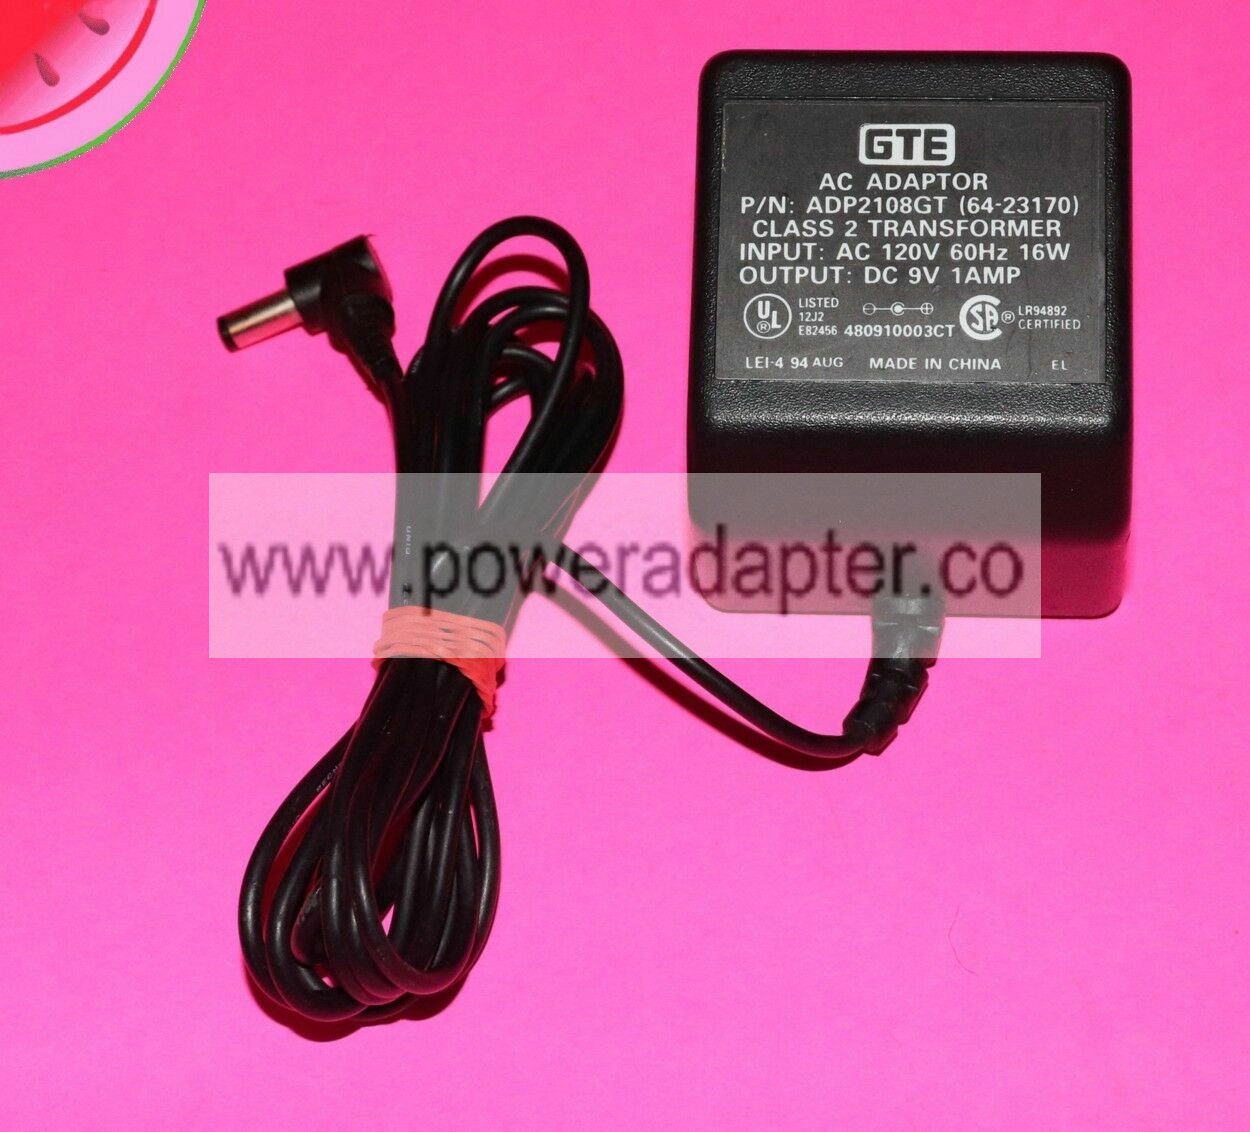 Power Supply Adapter GTE ADP2108GT AC / DC 9V 1amp 1000mA Charger Genuine Bundle Listing: No Brand: GTE Model: ADP - Click Image to Close